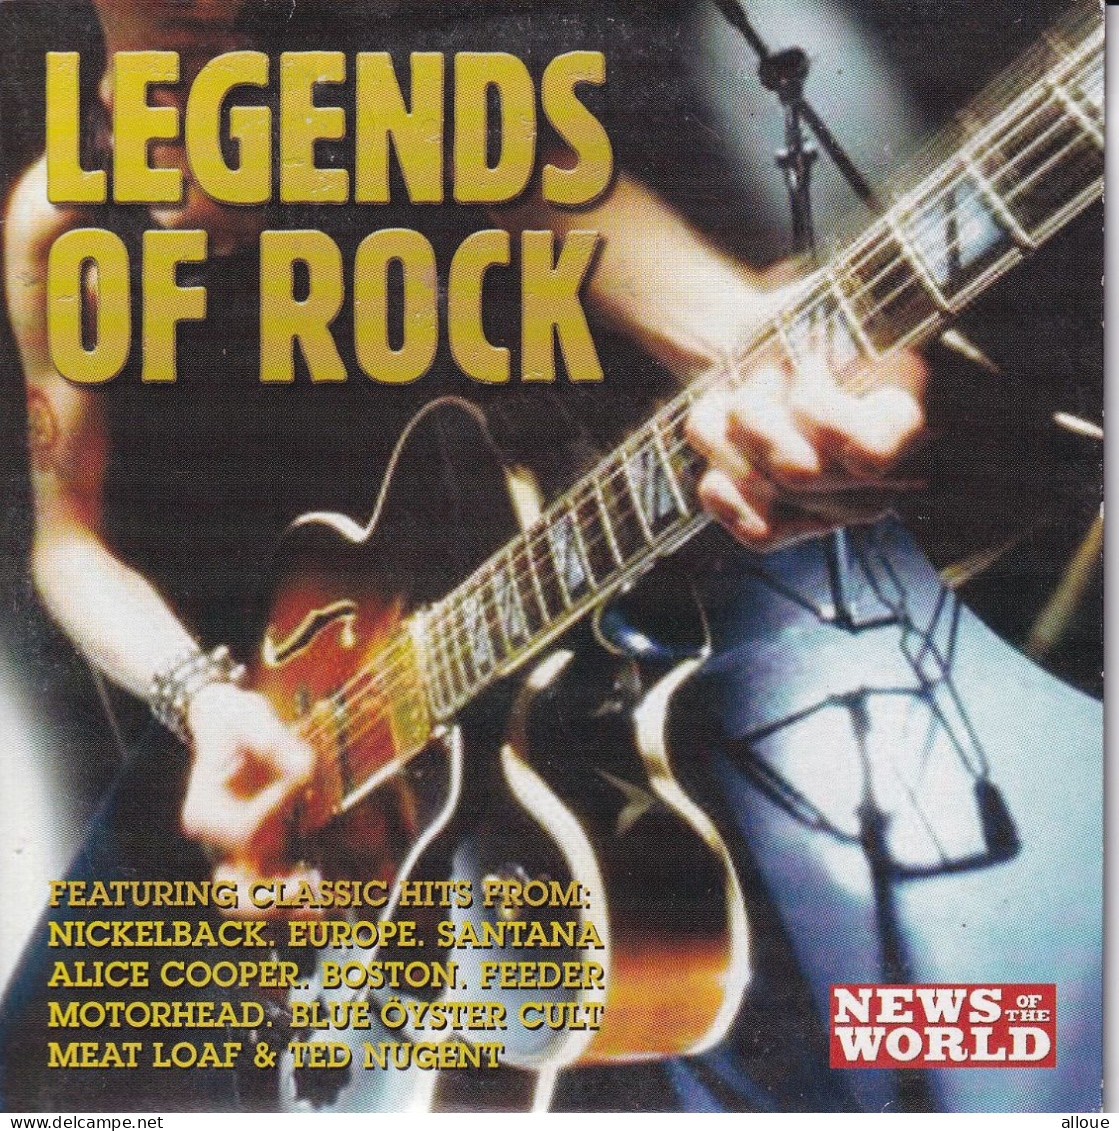 LEGENDS OF ROCK - CD NEWS OF THE WORLD -POCHETTE CARTON 10TRACK - MEAT LOAF-ALICE COOPER-EUROPE-MOTORHEAD - Autres - Musique Anglaise